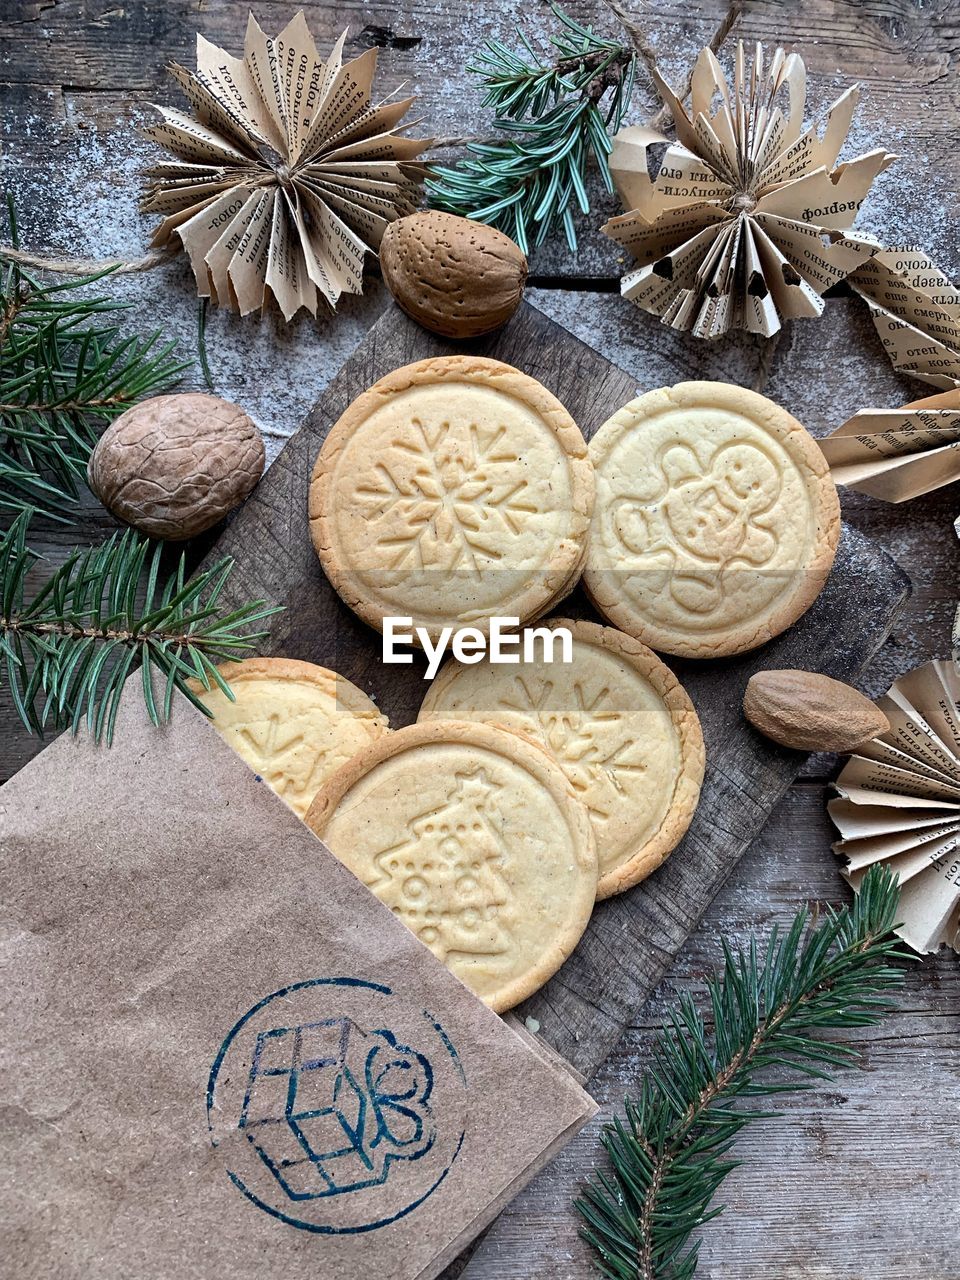 Festive cookies made at home for the new year. holiday mood. home baking recipes